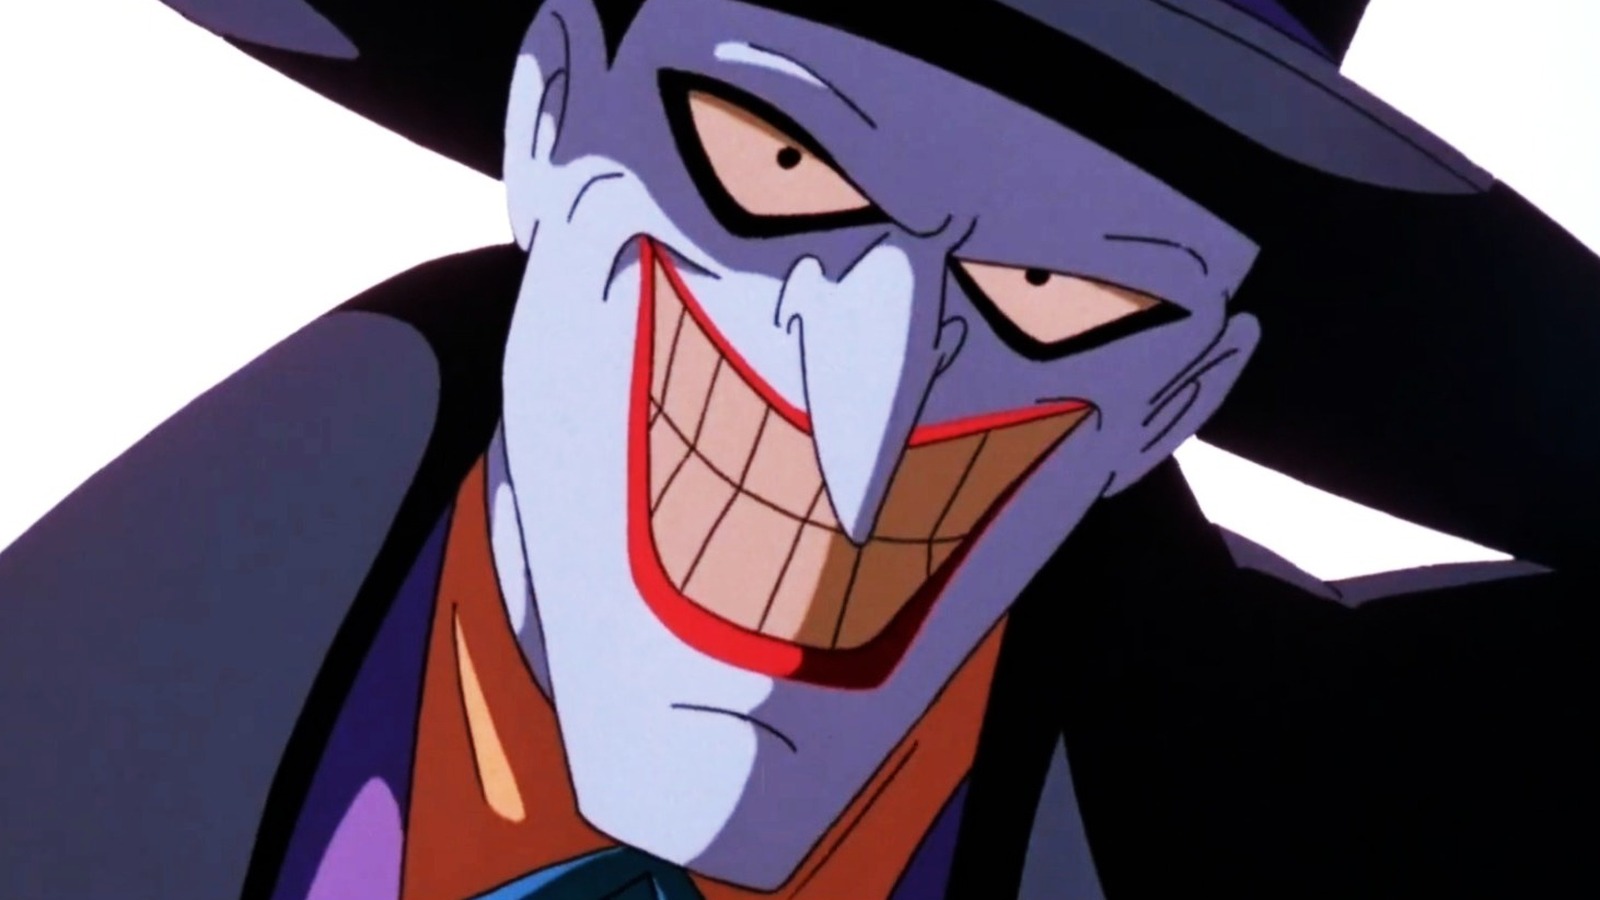 MultiVersus datamine suggests Mark Hamill's Joker may be coming to the game